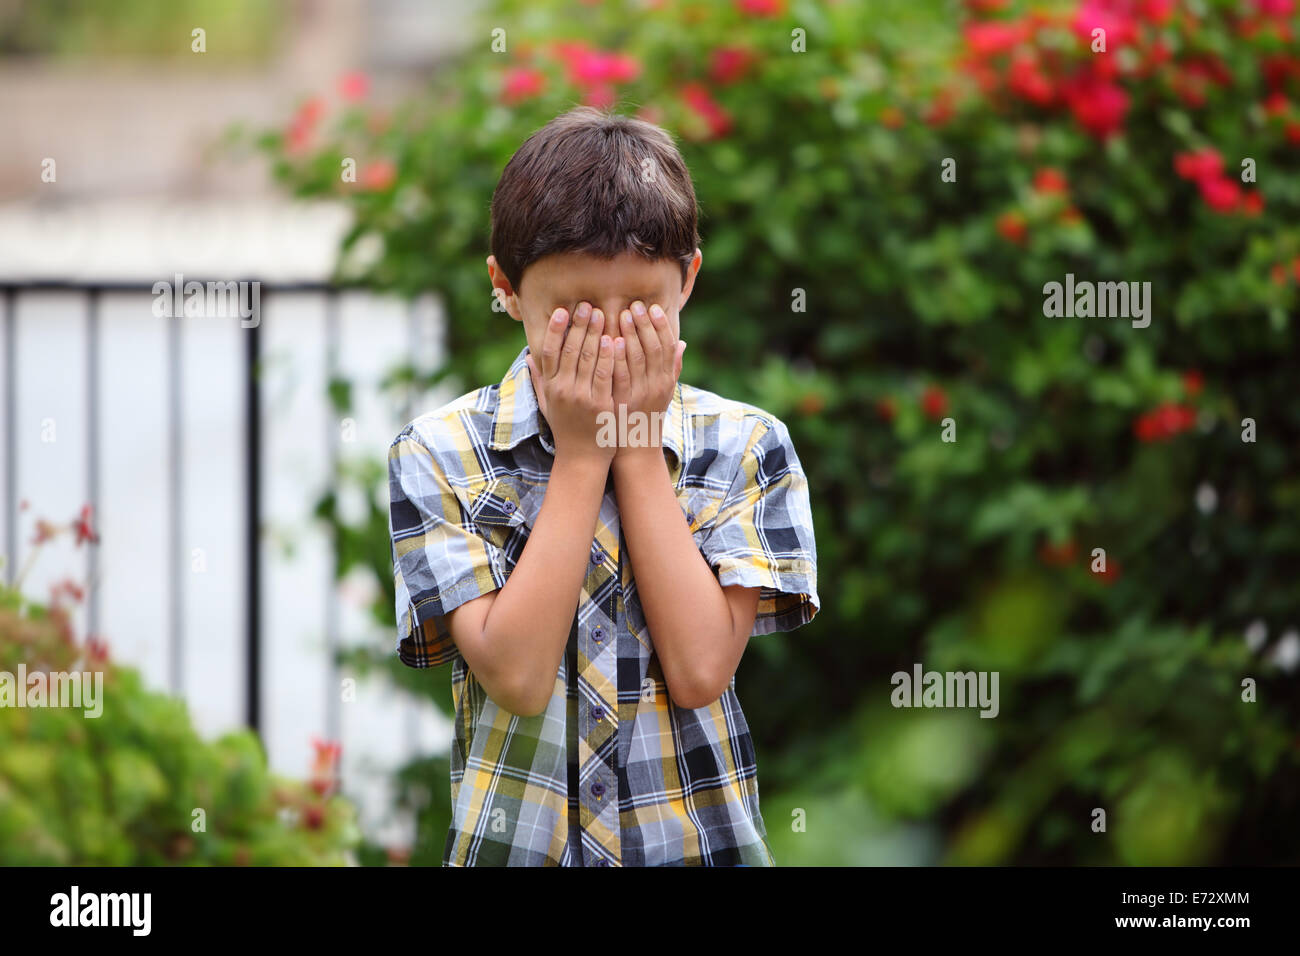 Young boy covers his eyes with hands Stock Photo